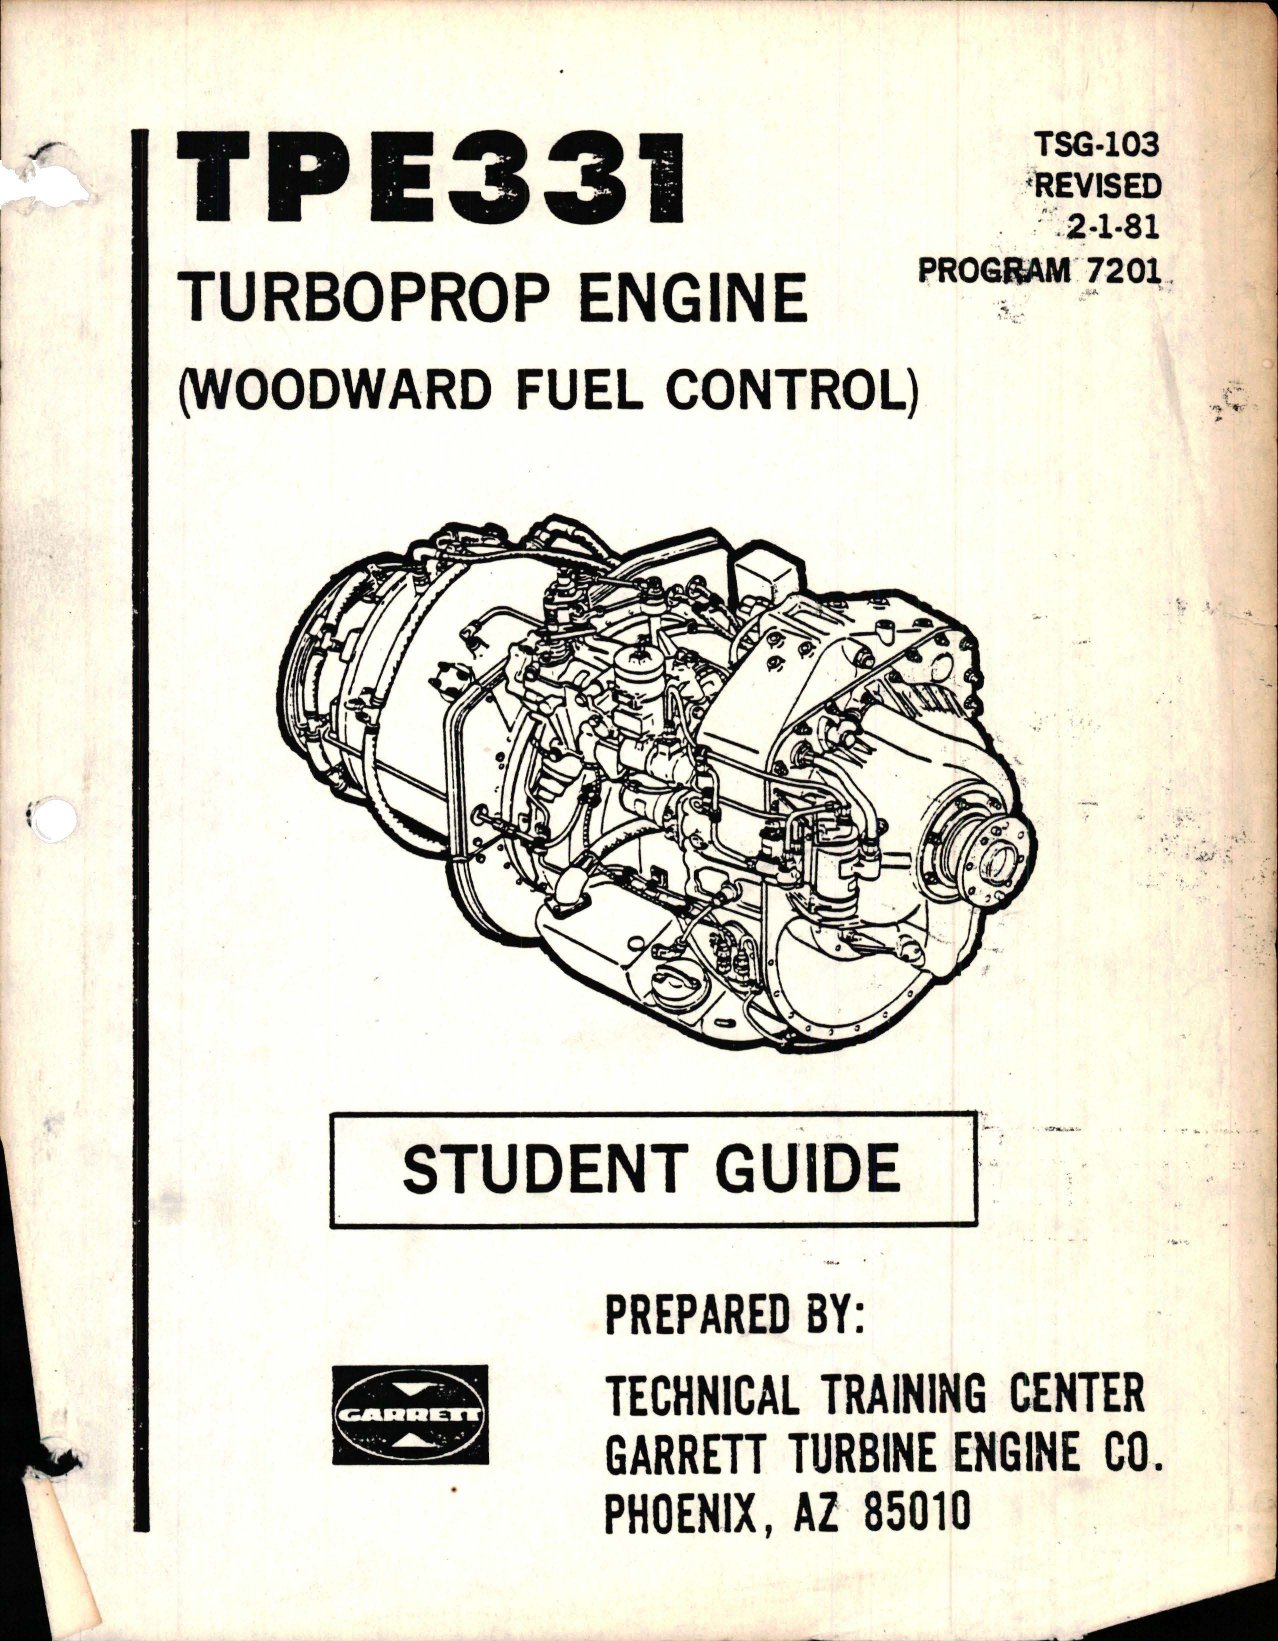 Sample page 1 from AirCorps Library document: Student Guide for Turboprop Engine (Woodward Fuel Control) - TPE331 - Program 7201